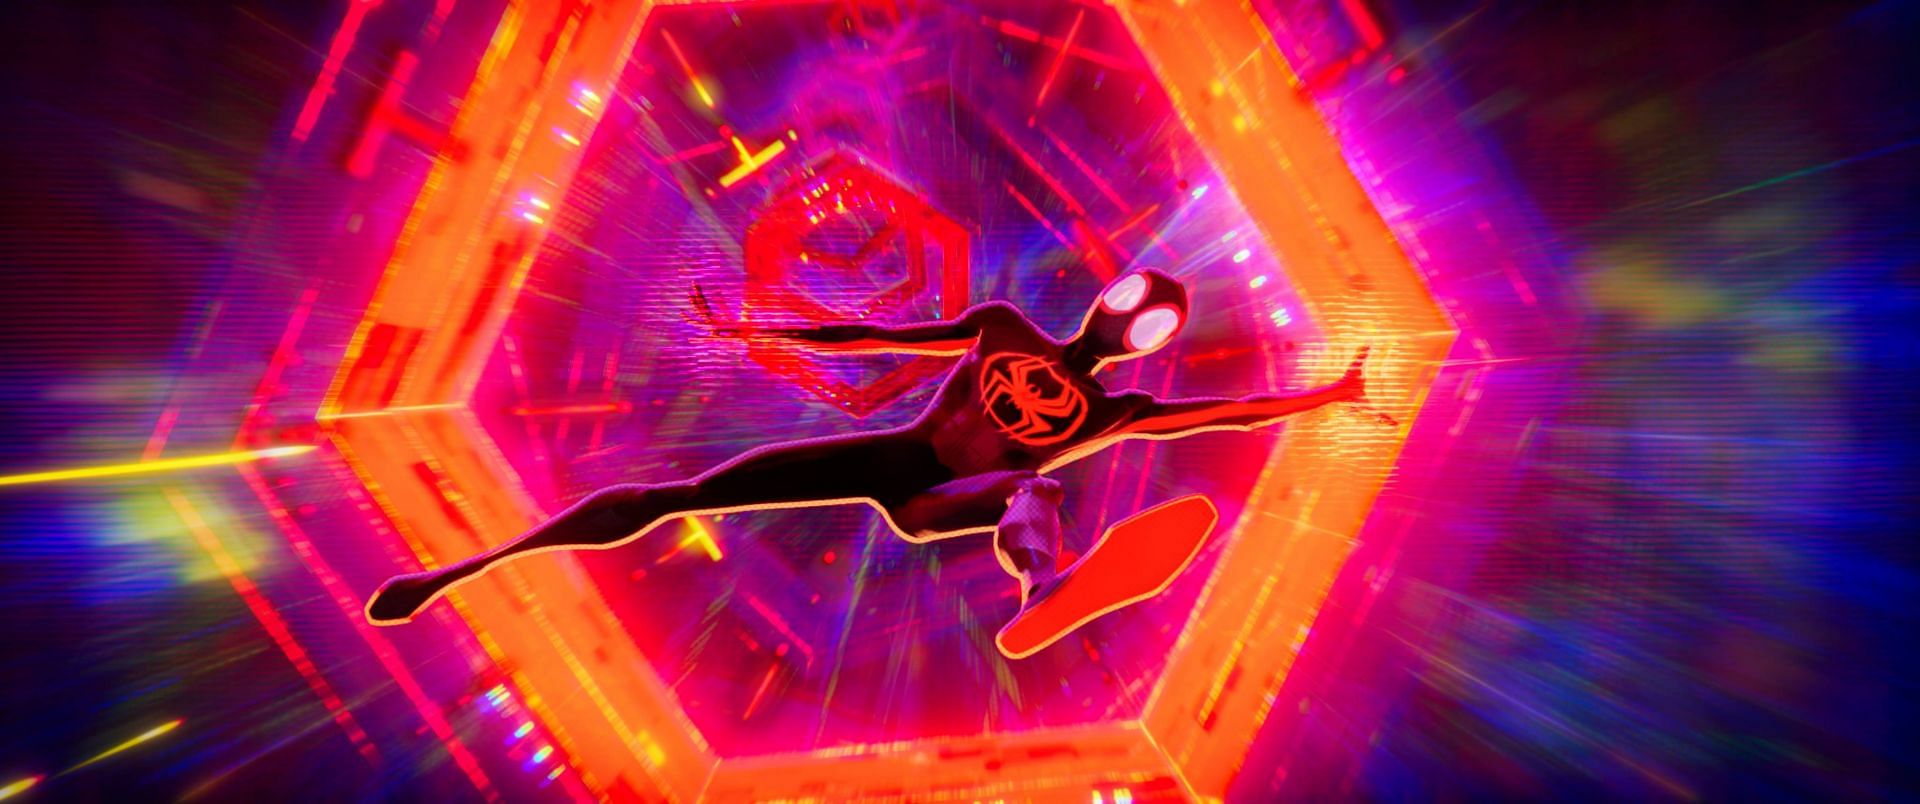 PS4 Spider-Man Appears In New Across The Spider-Verse Trailer